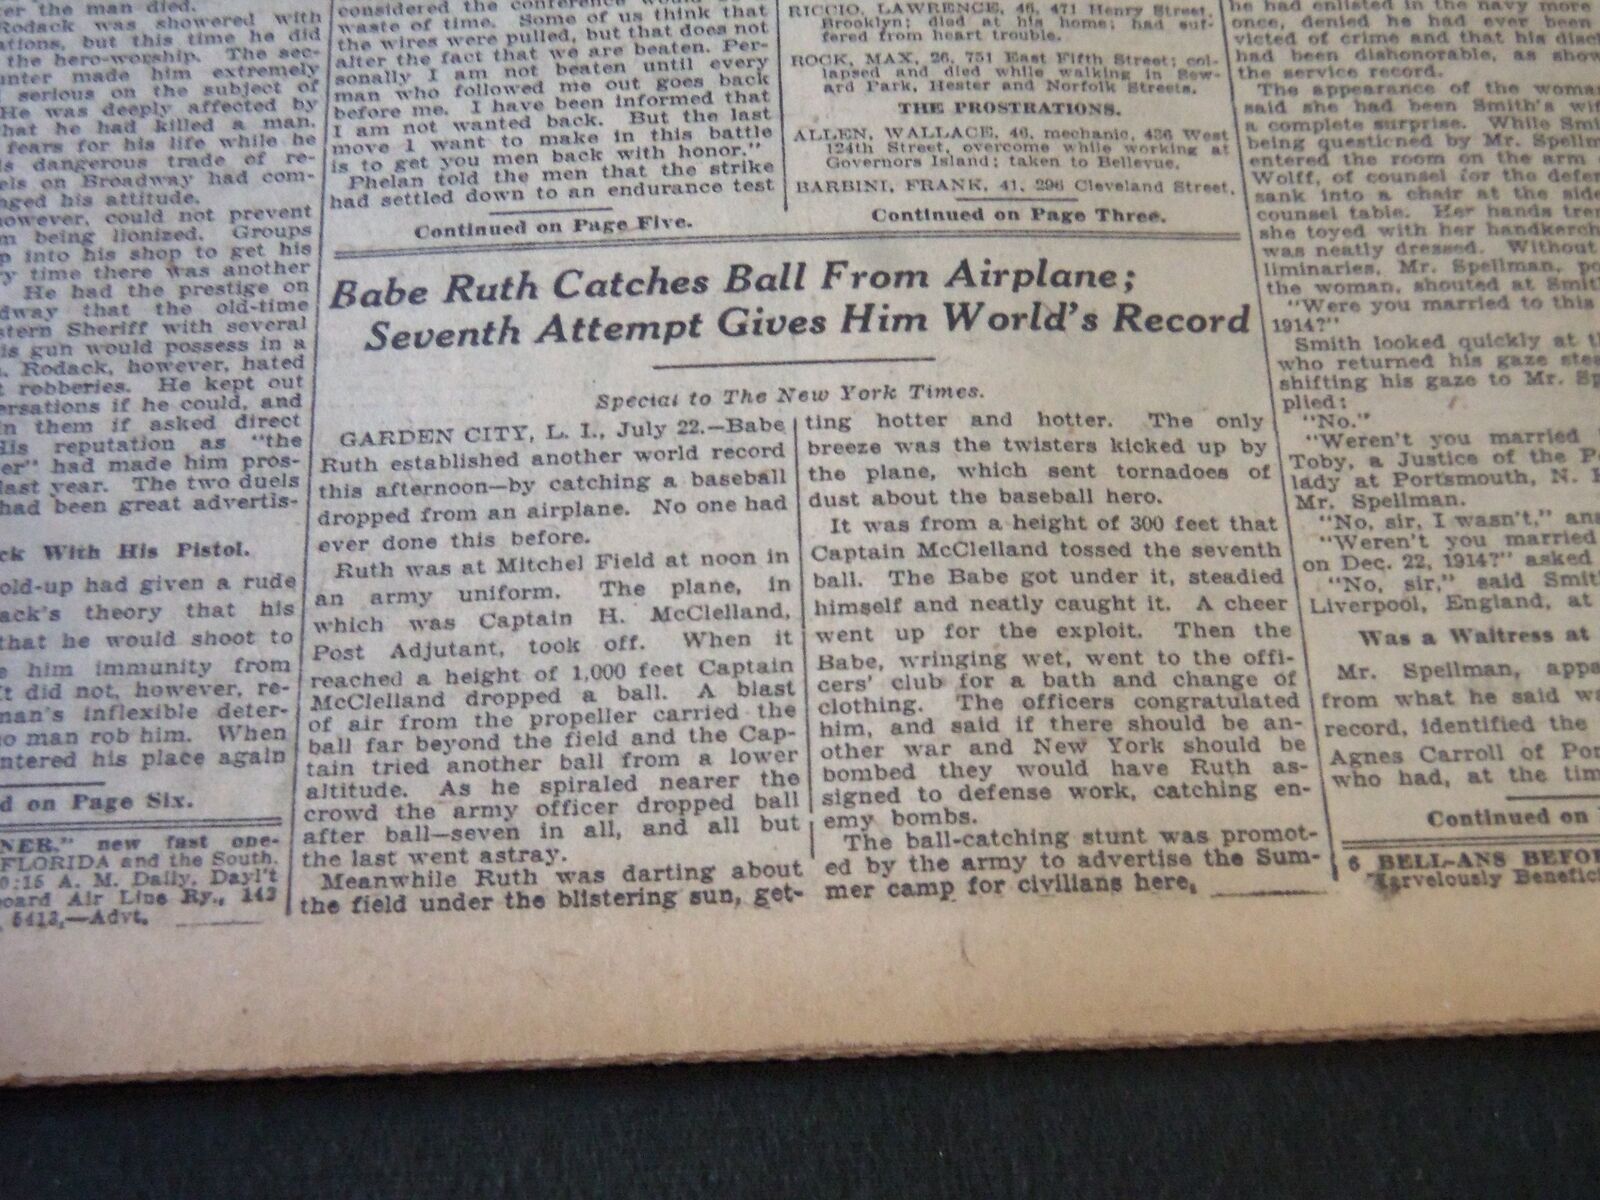 1926 JULY 23 NEW YORK TIMES - BABE RUTH CATCHES BALL FROM AIRPLANE - NT 6591